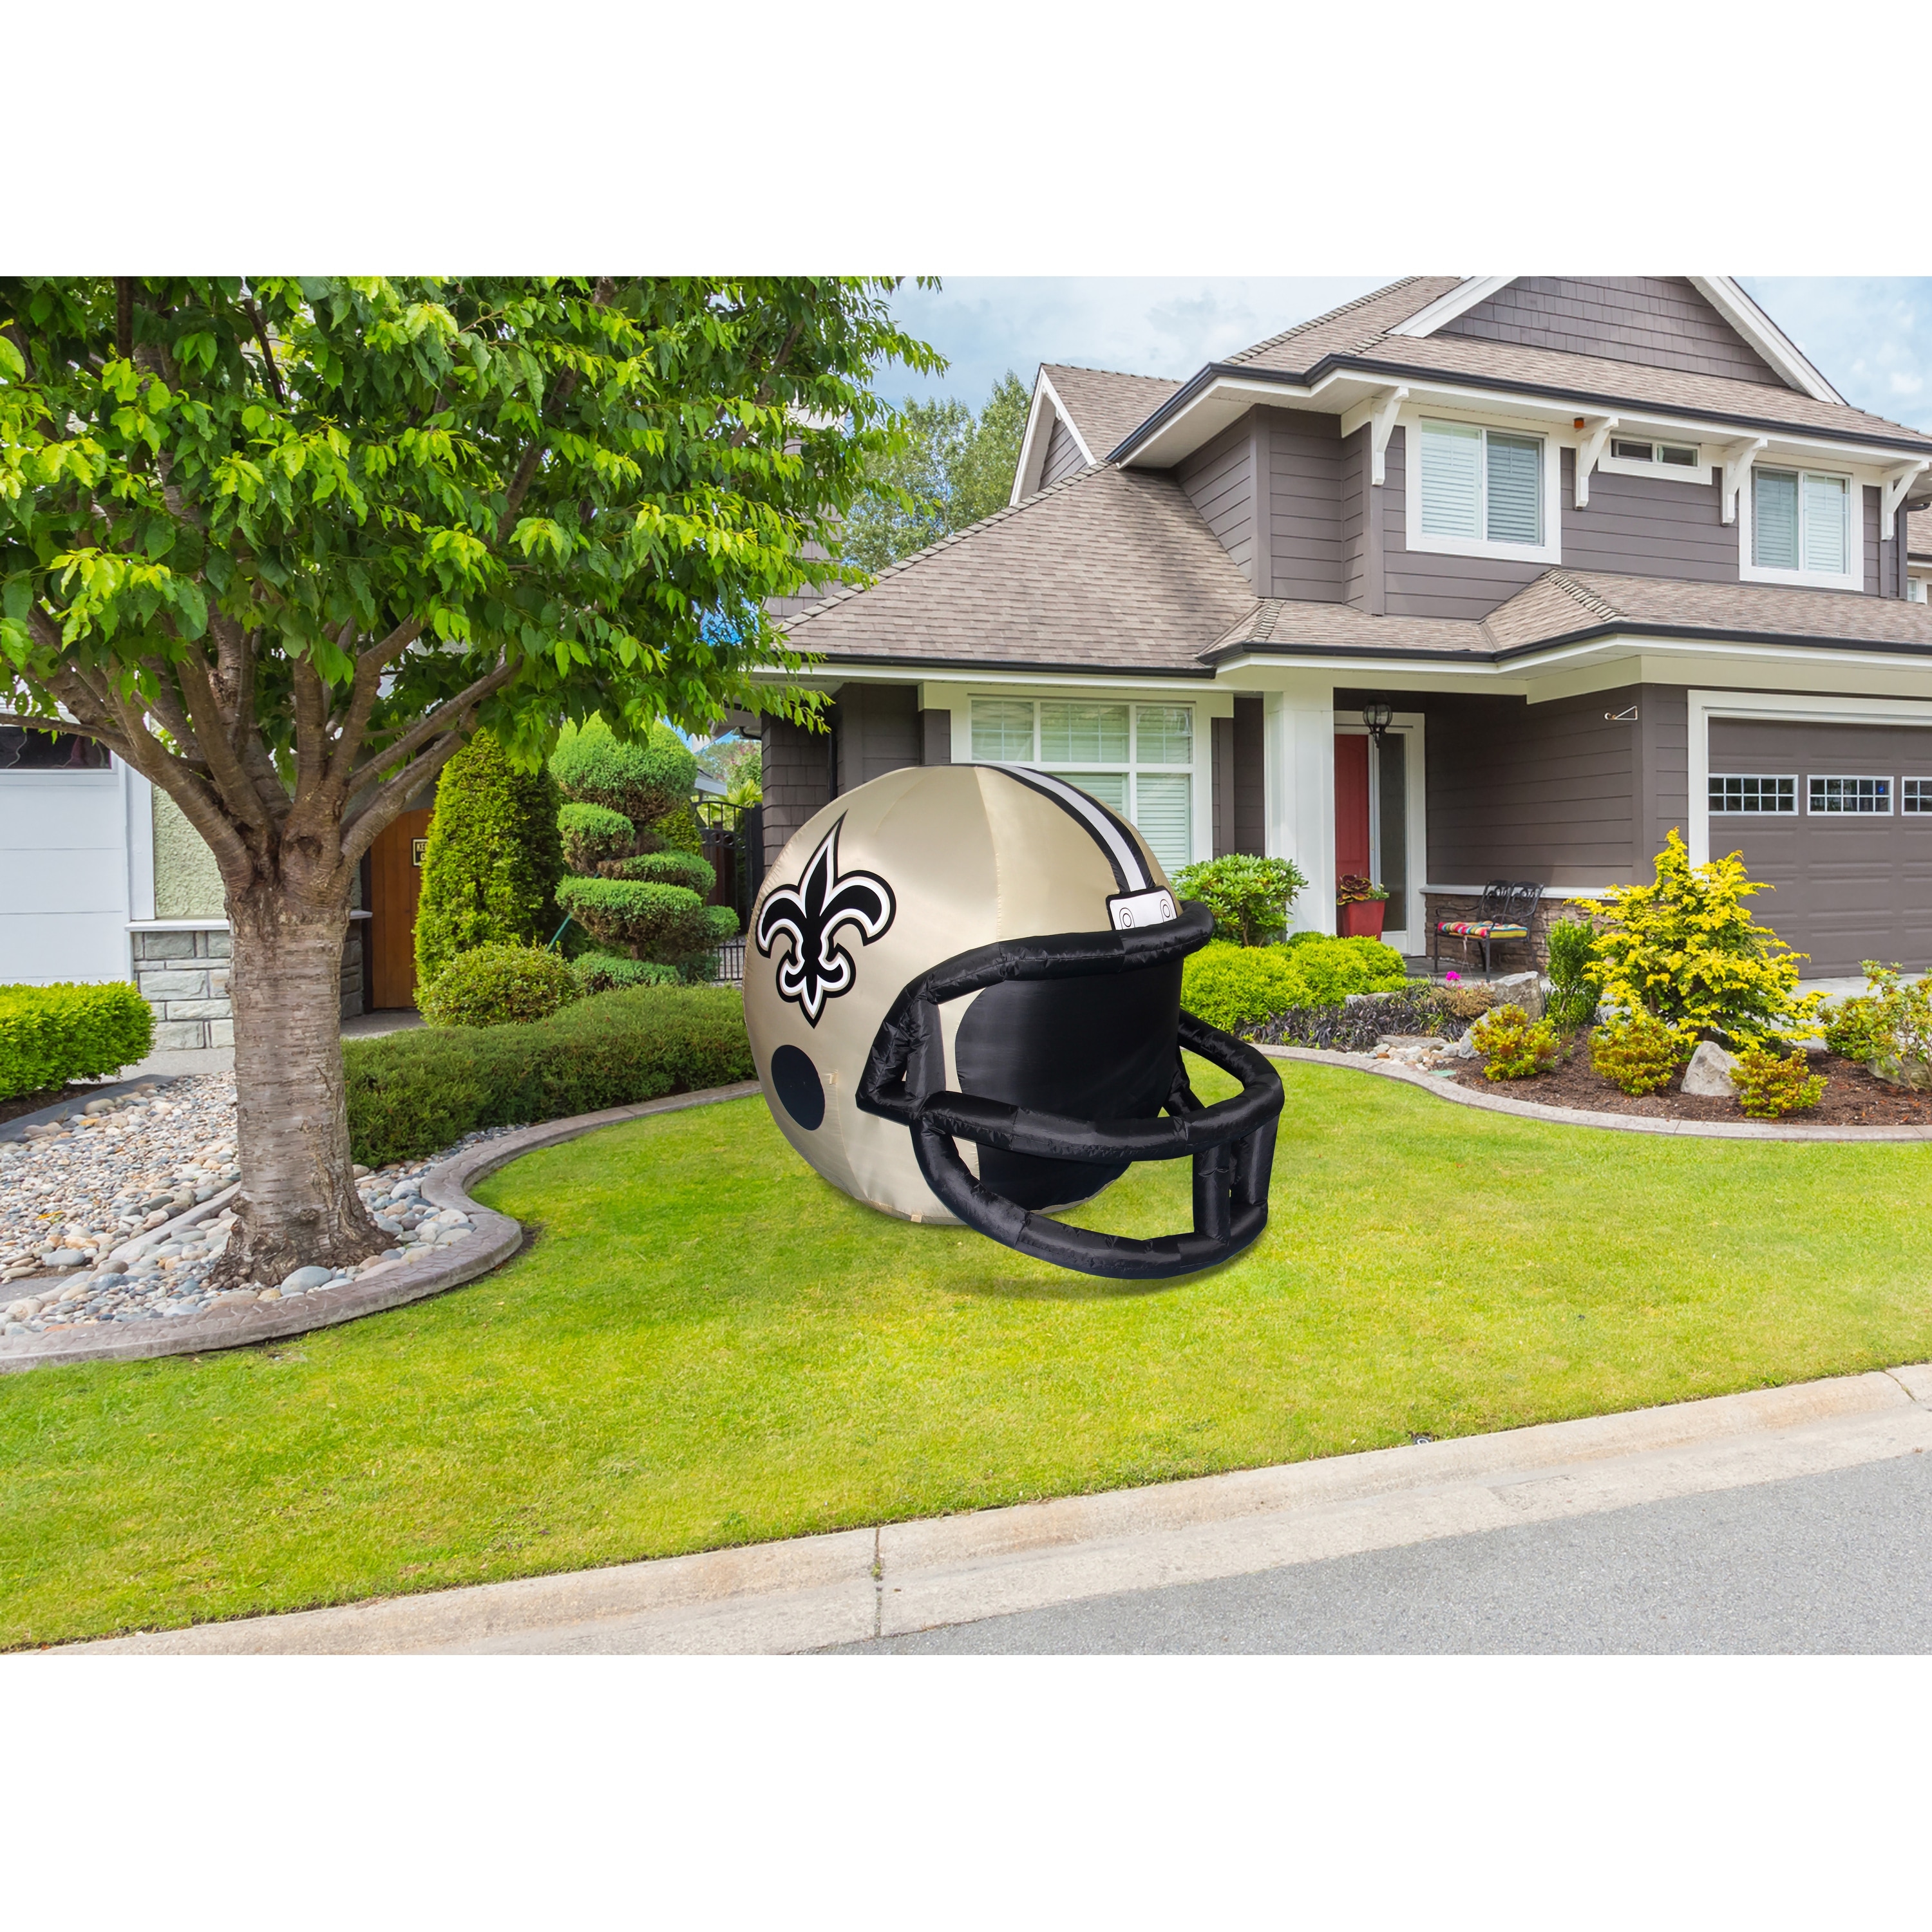 https://ak1.ostkcdn.com/images/products/is/images/direct/22eb30c862ad5ae7d23f674c961dcefe98c796f0/NFL-NEW-ORLEANS-SAINTS-Team-Inflatable-Helmet---4-ft..jpg